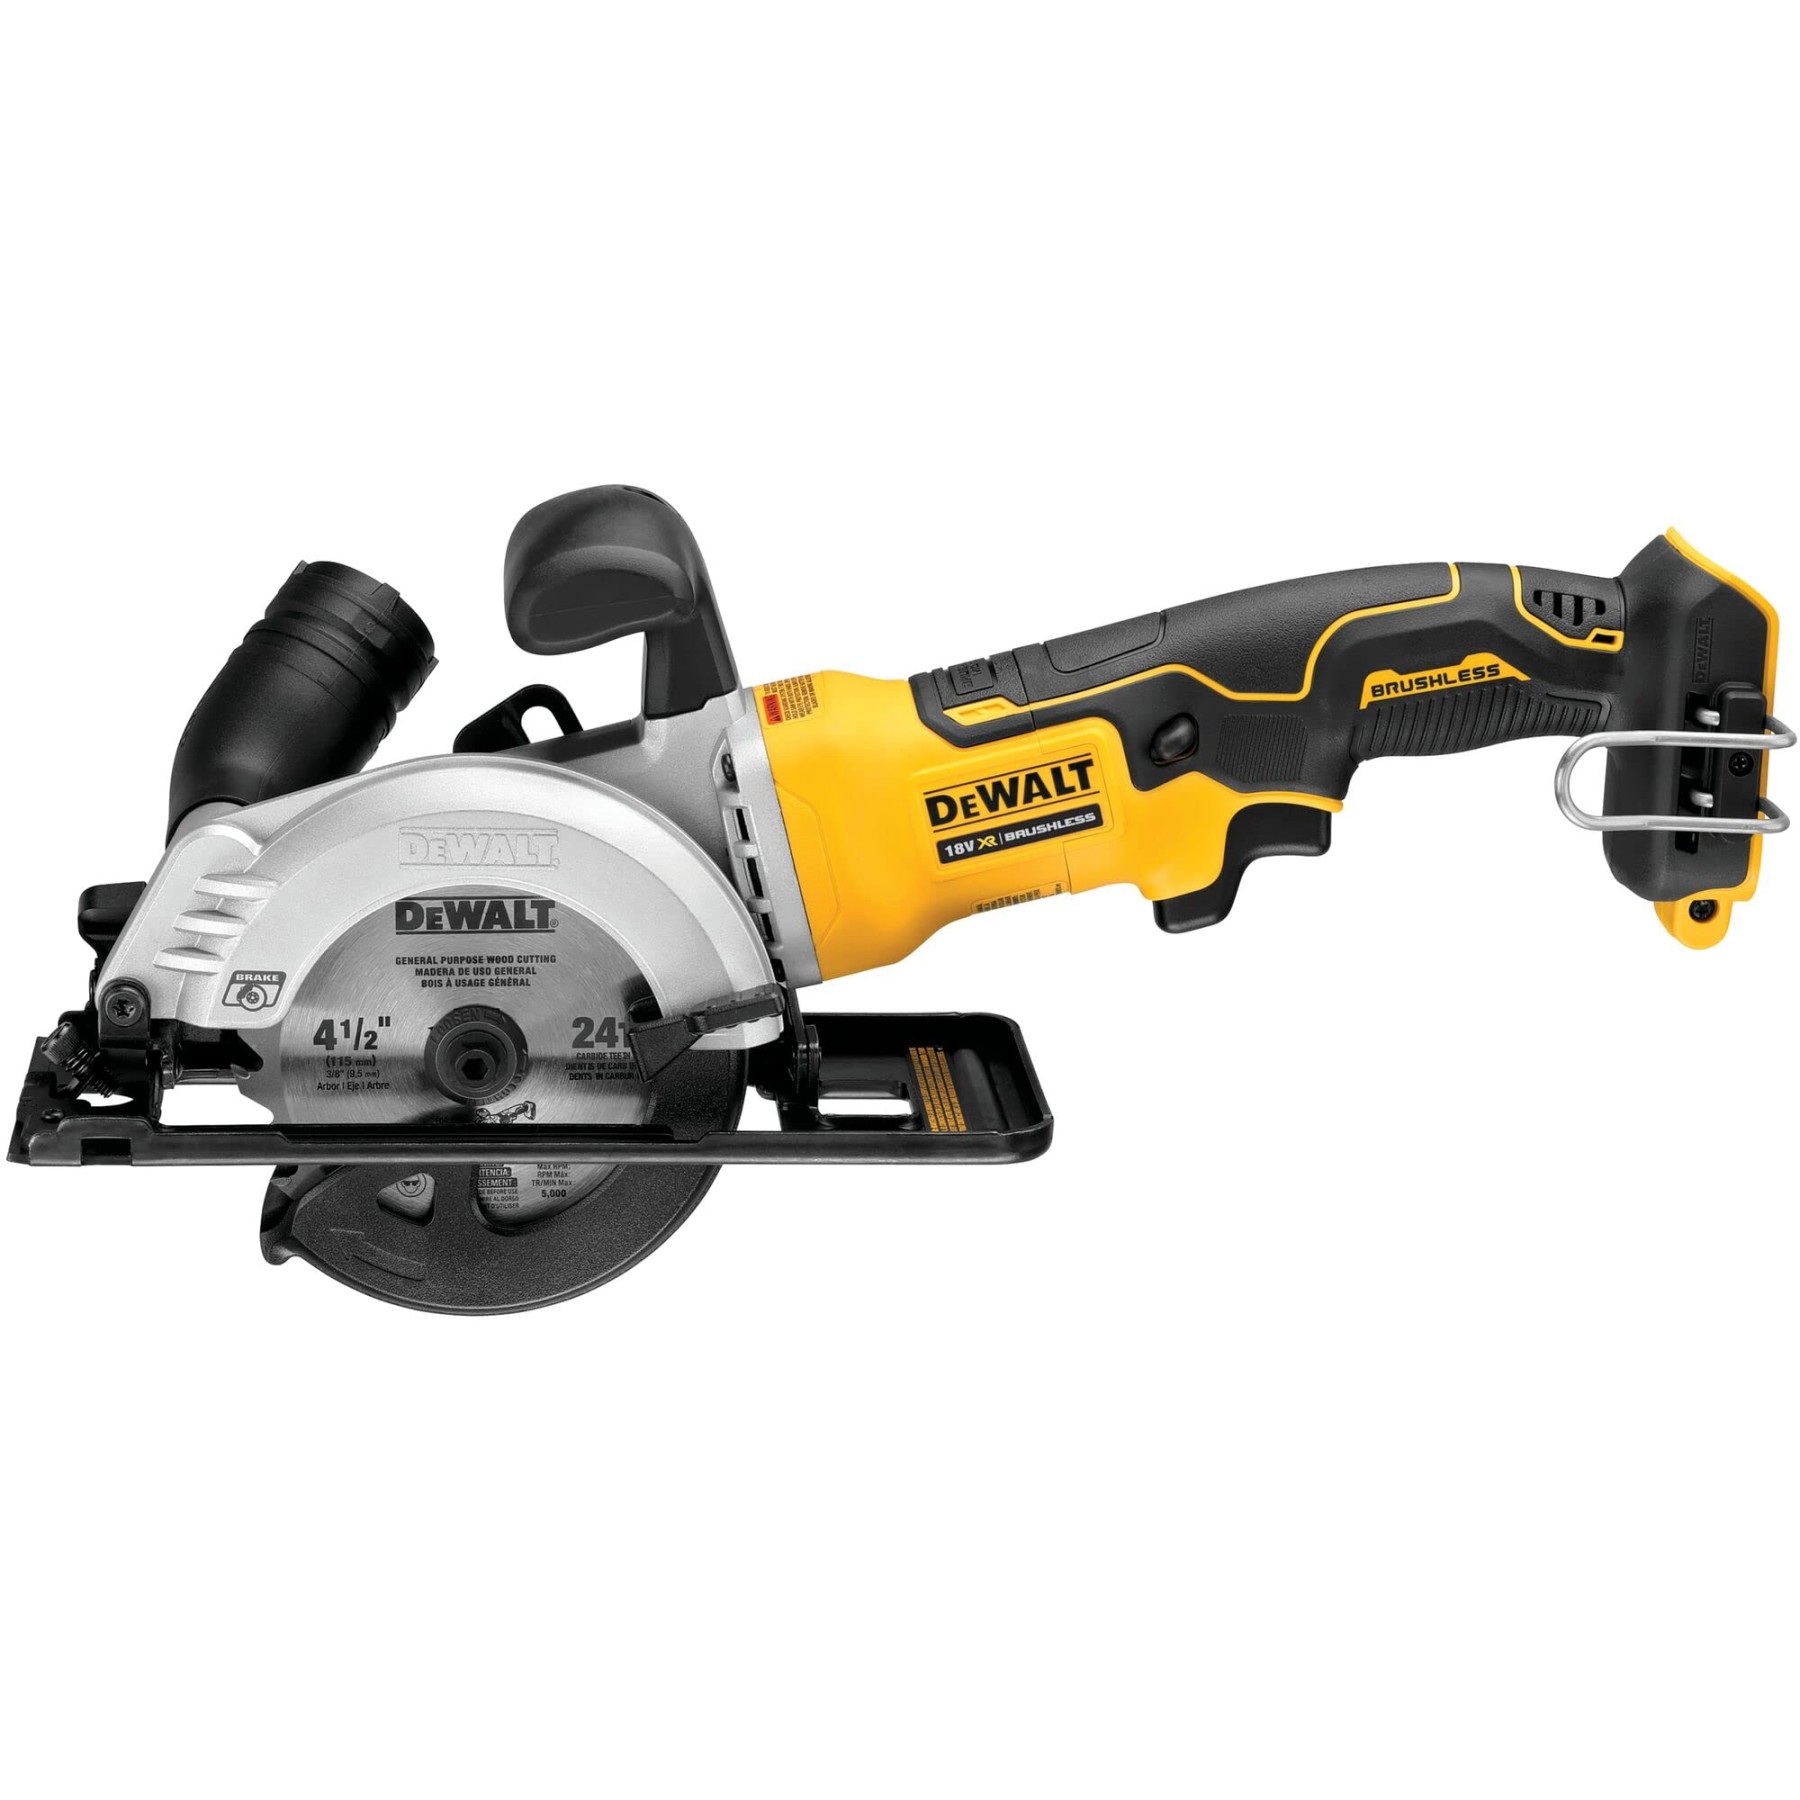 dewalt-dcsnt-cordless-circular-saw-v-brushless-mm-max-cutting-depth-special-construction-for-one-hand-operation-includes-hm-saw-blade Dewalt Cordless Saw Review: Cutting Power Without The Cord? picture